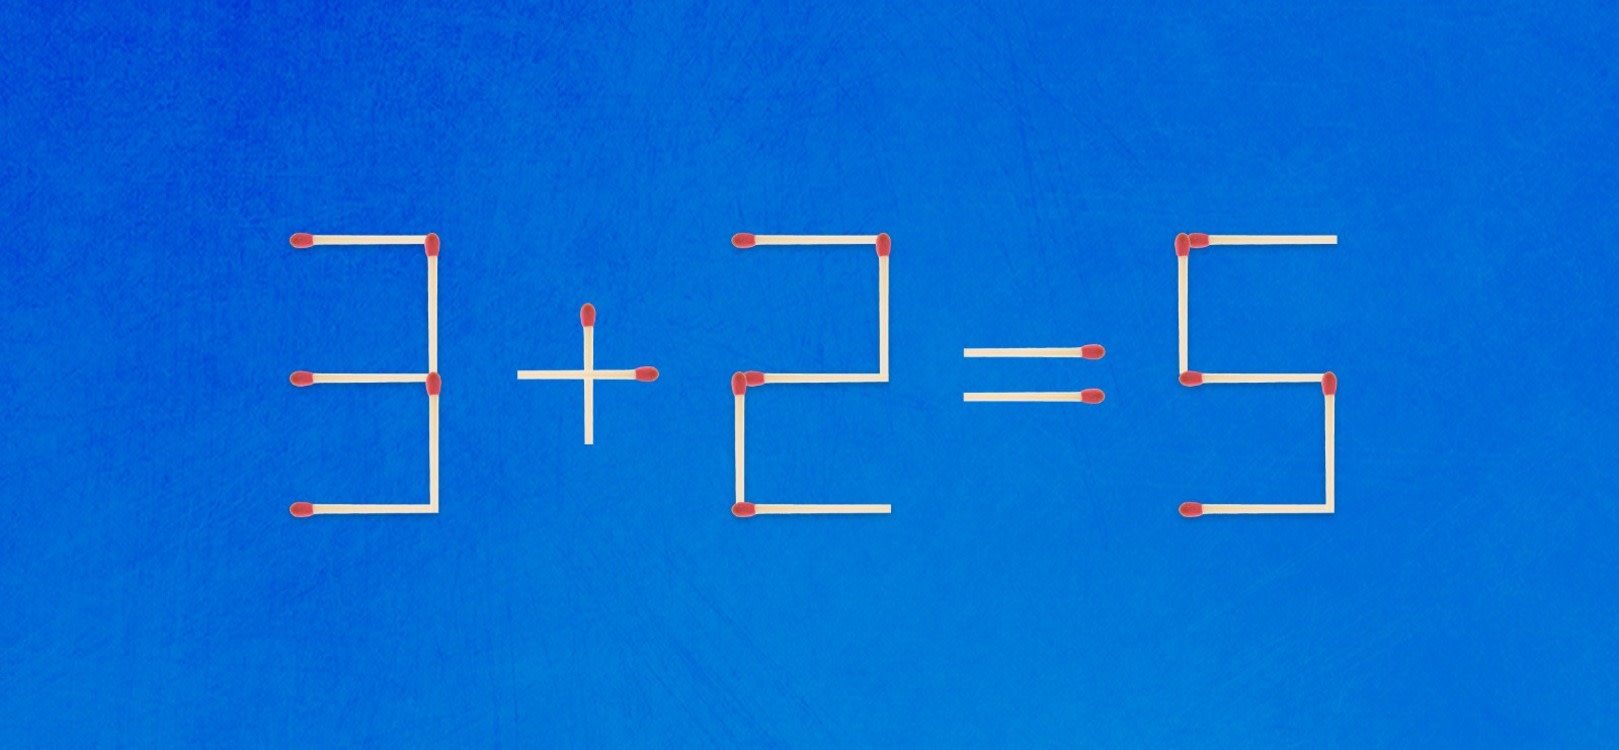 Matchstick puzzles with answers to improve your brain 